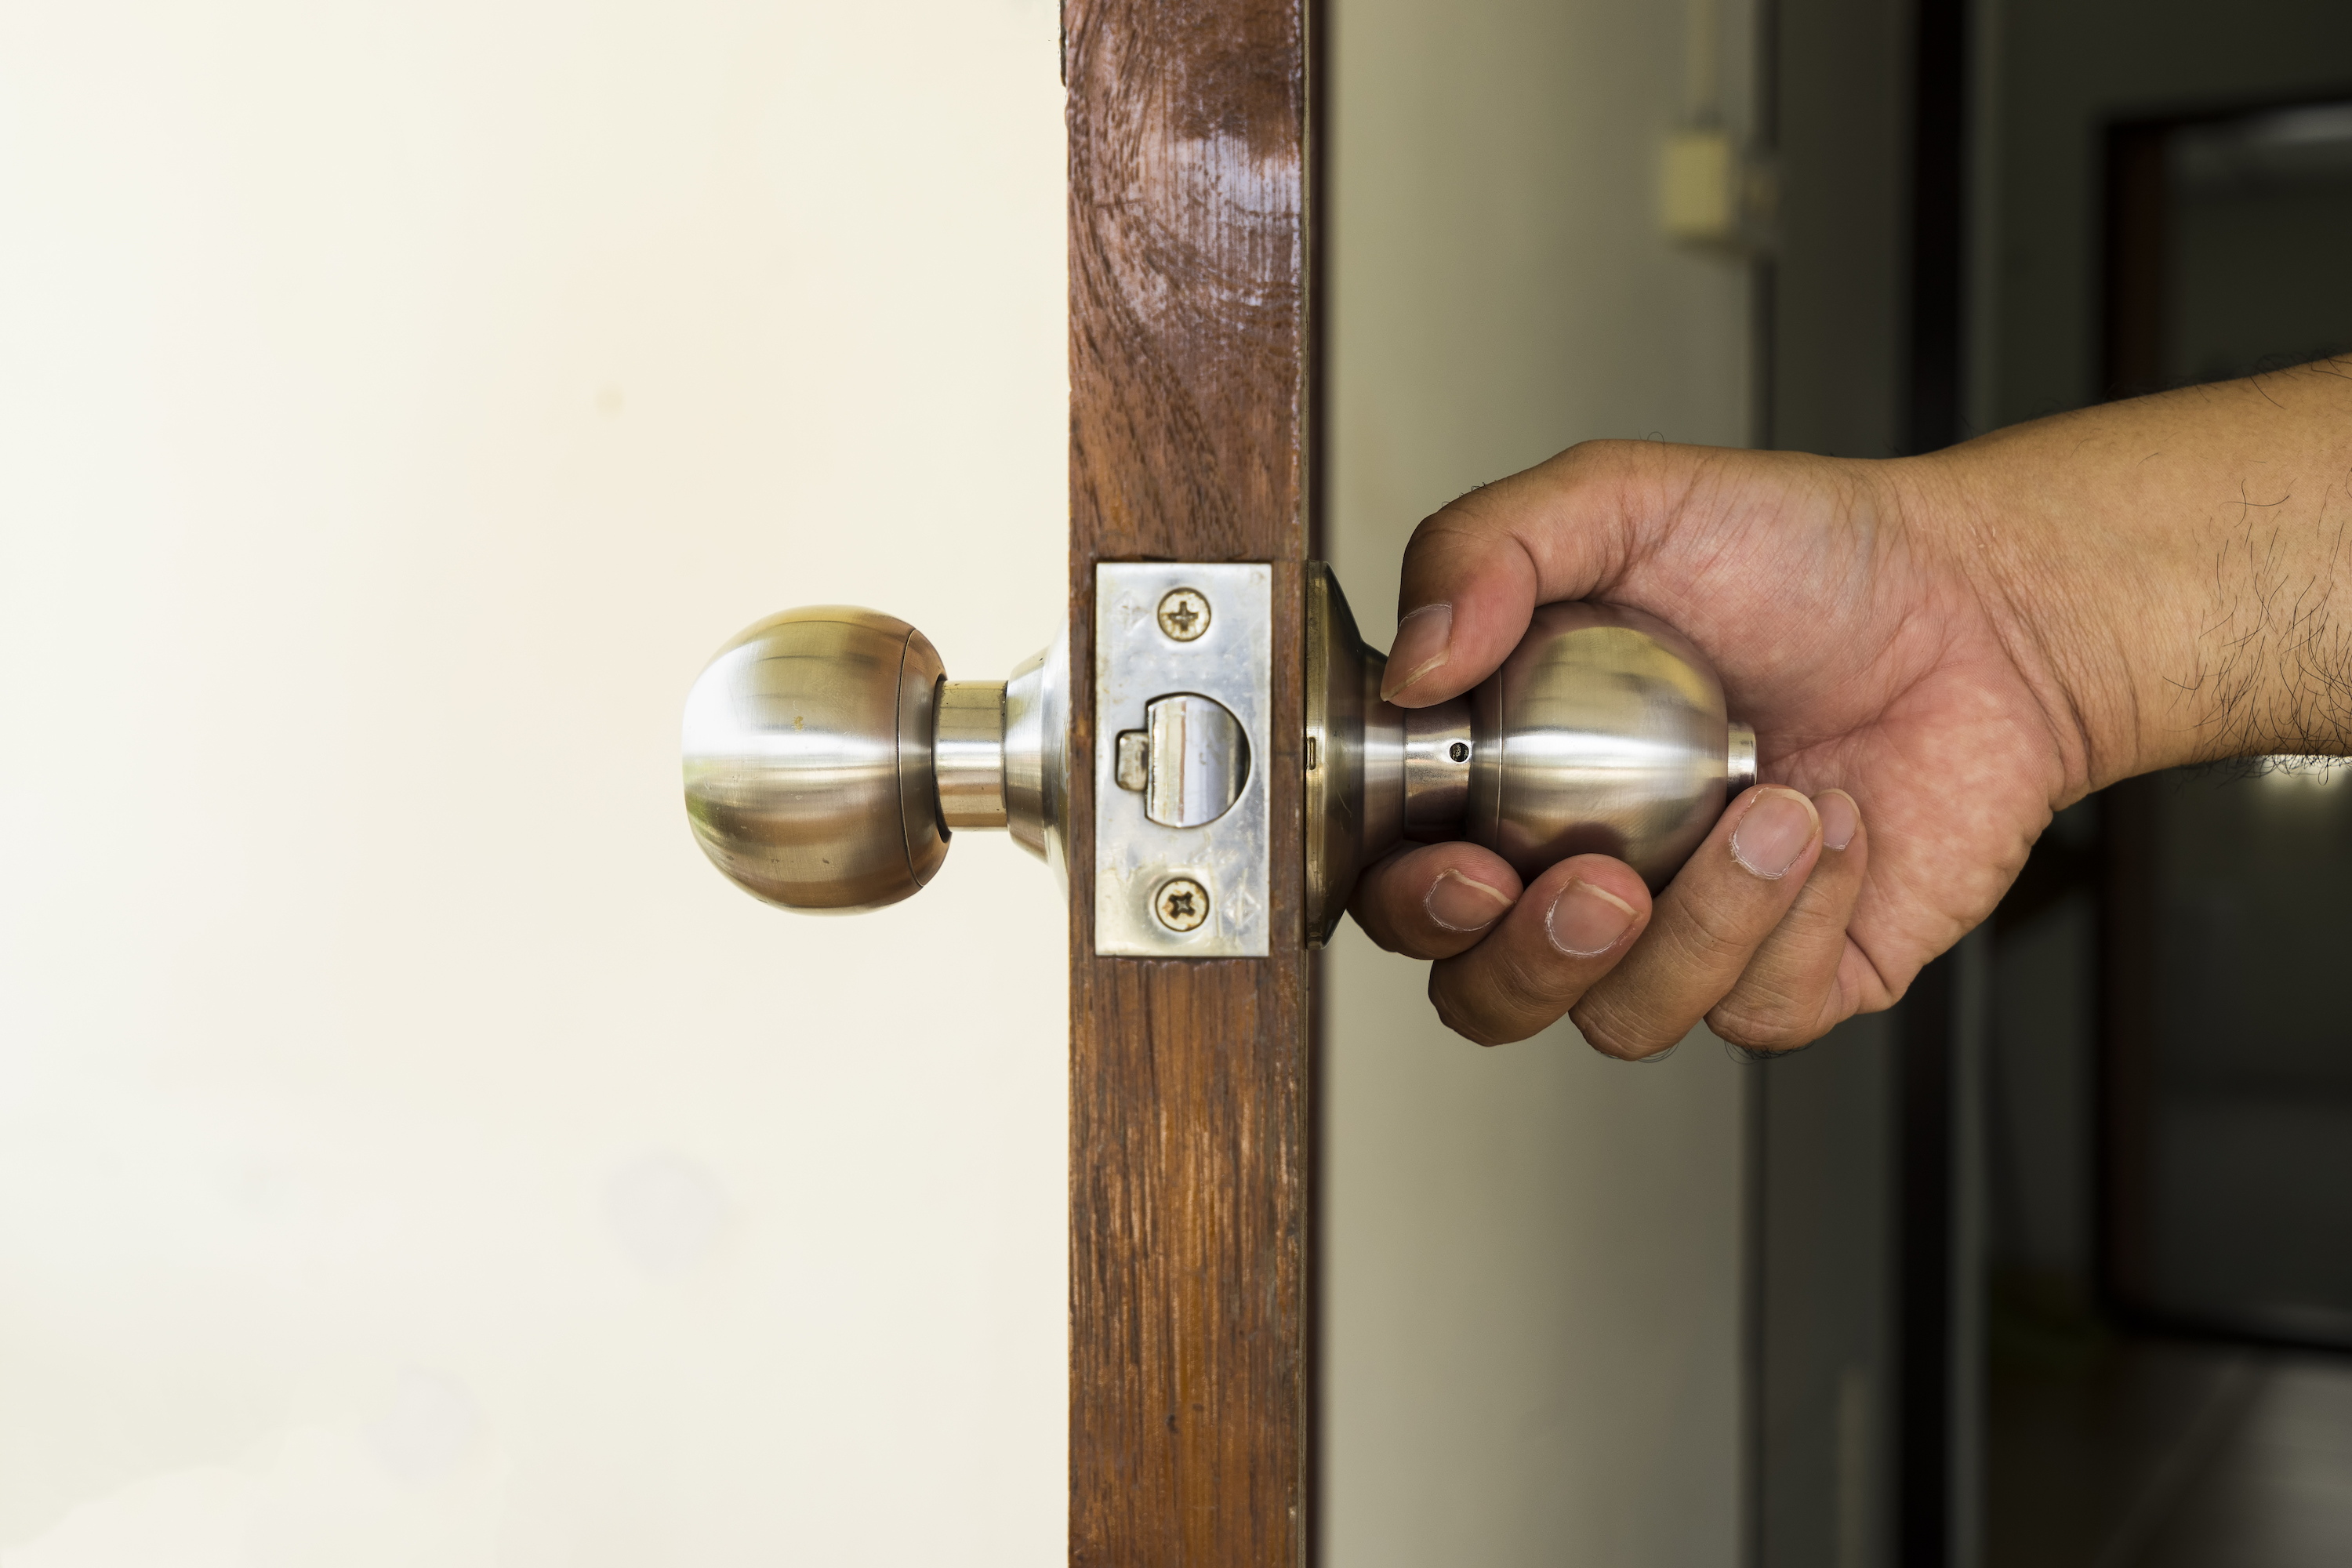 Best Lock Replacement By Locksmith Tampa Security Lock Systems Call 813-874-1608